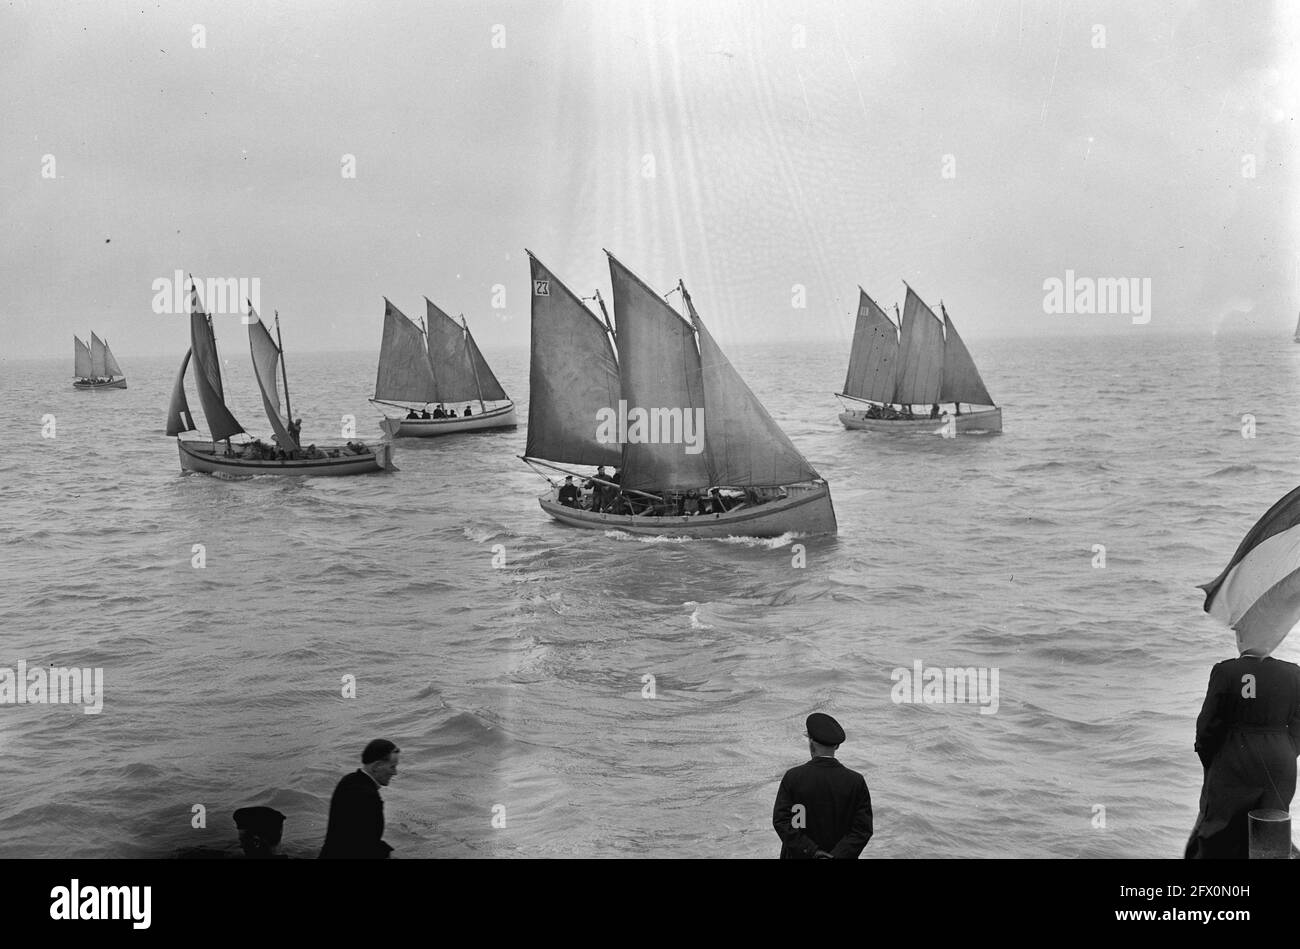 Sailing Competition of the Royal Navy Colonel Bax, October 24, 1952, MARINE, sailing competitions, The Netherlands, 20th century press agency photo, news to remember, documentary, historic photography 1945-1990, visual stories, human history of the Twentieth Century, capturing moments in time Stock Photo